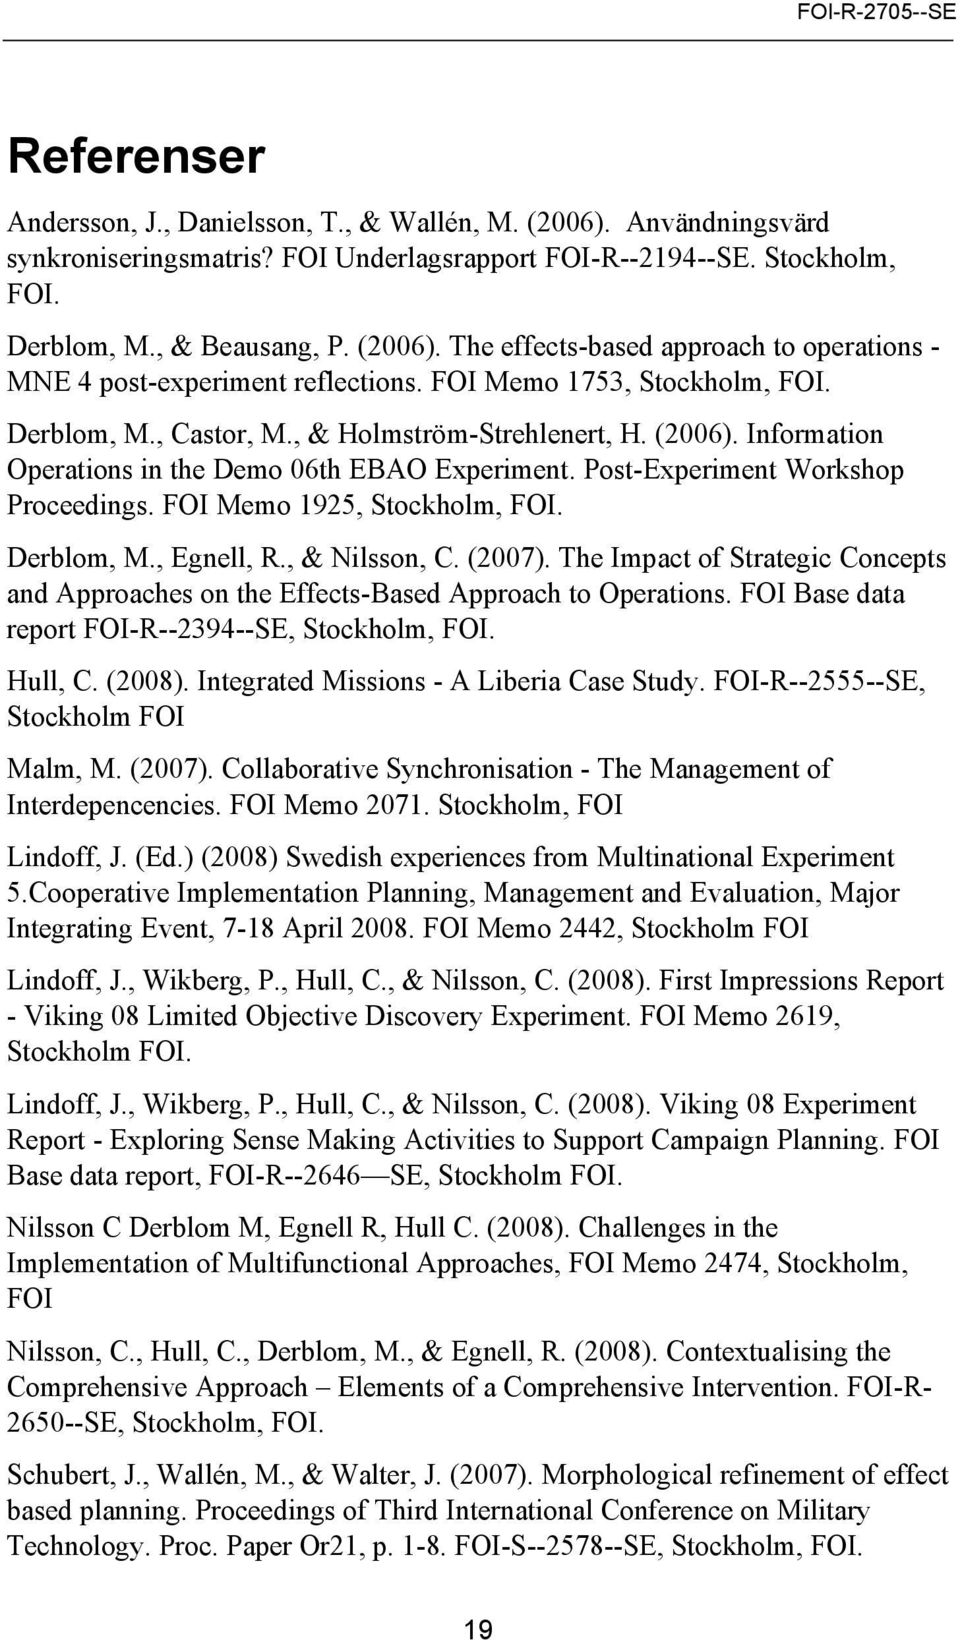 FOI Memo 1925, Stockholm, FOI. Derblom, M., Egnell, R., & Nilsson, C. (2007). The Impact of Strategic Concepts and Approaches on the Effects-Based Approach to Operations.